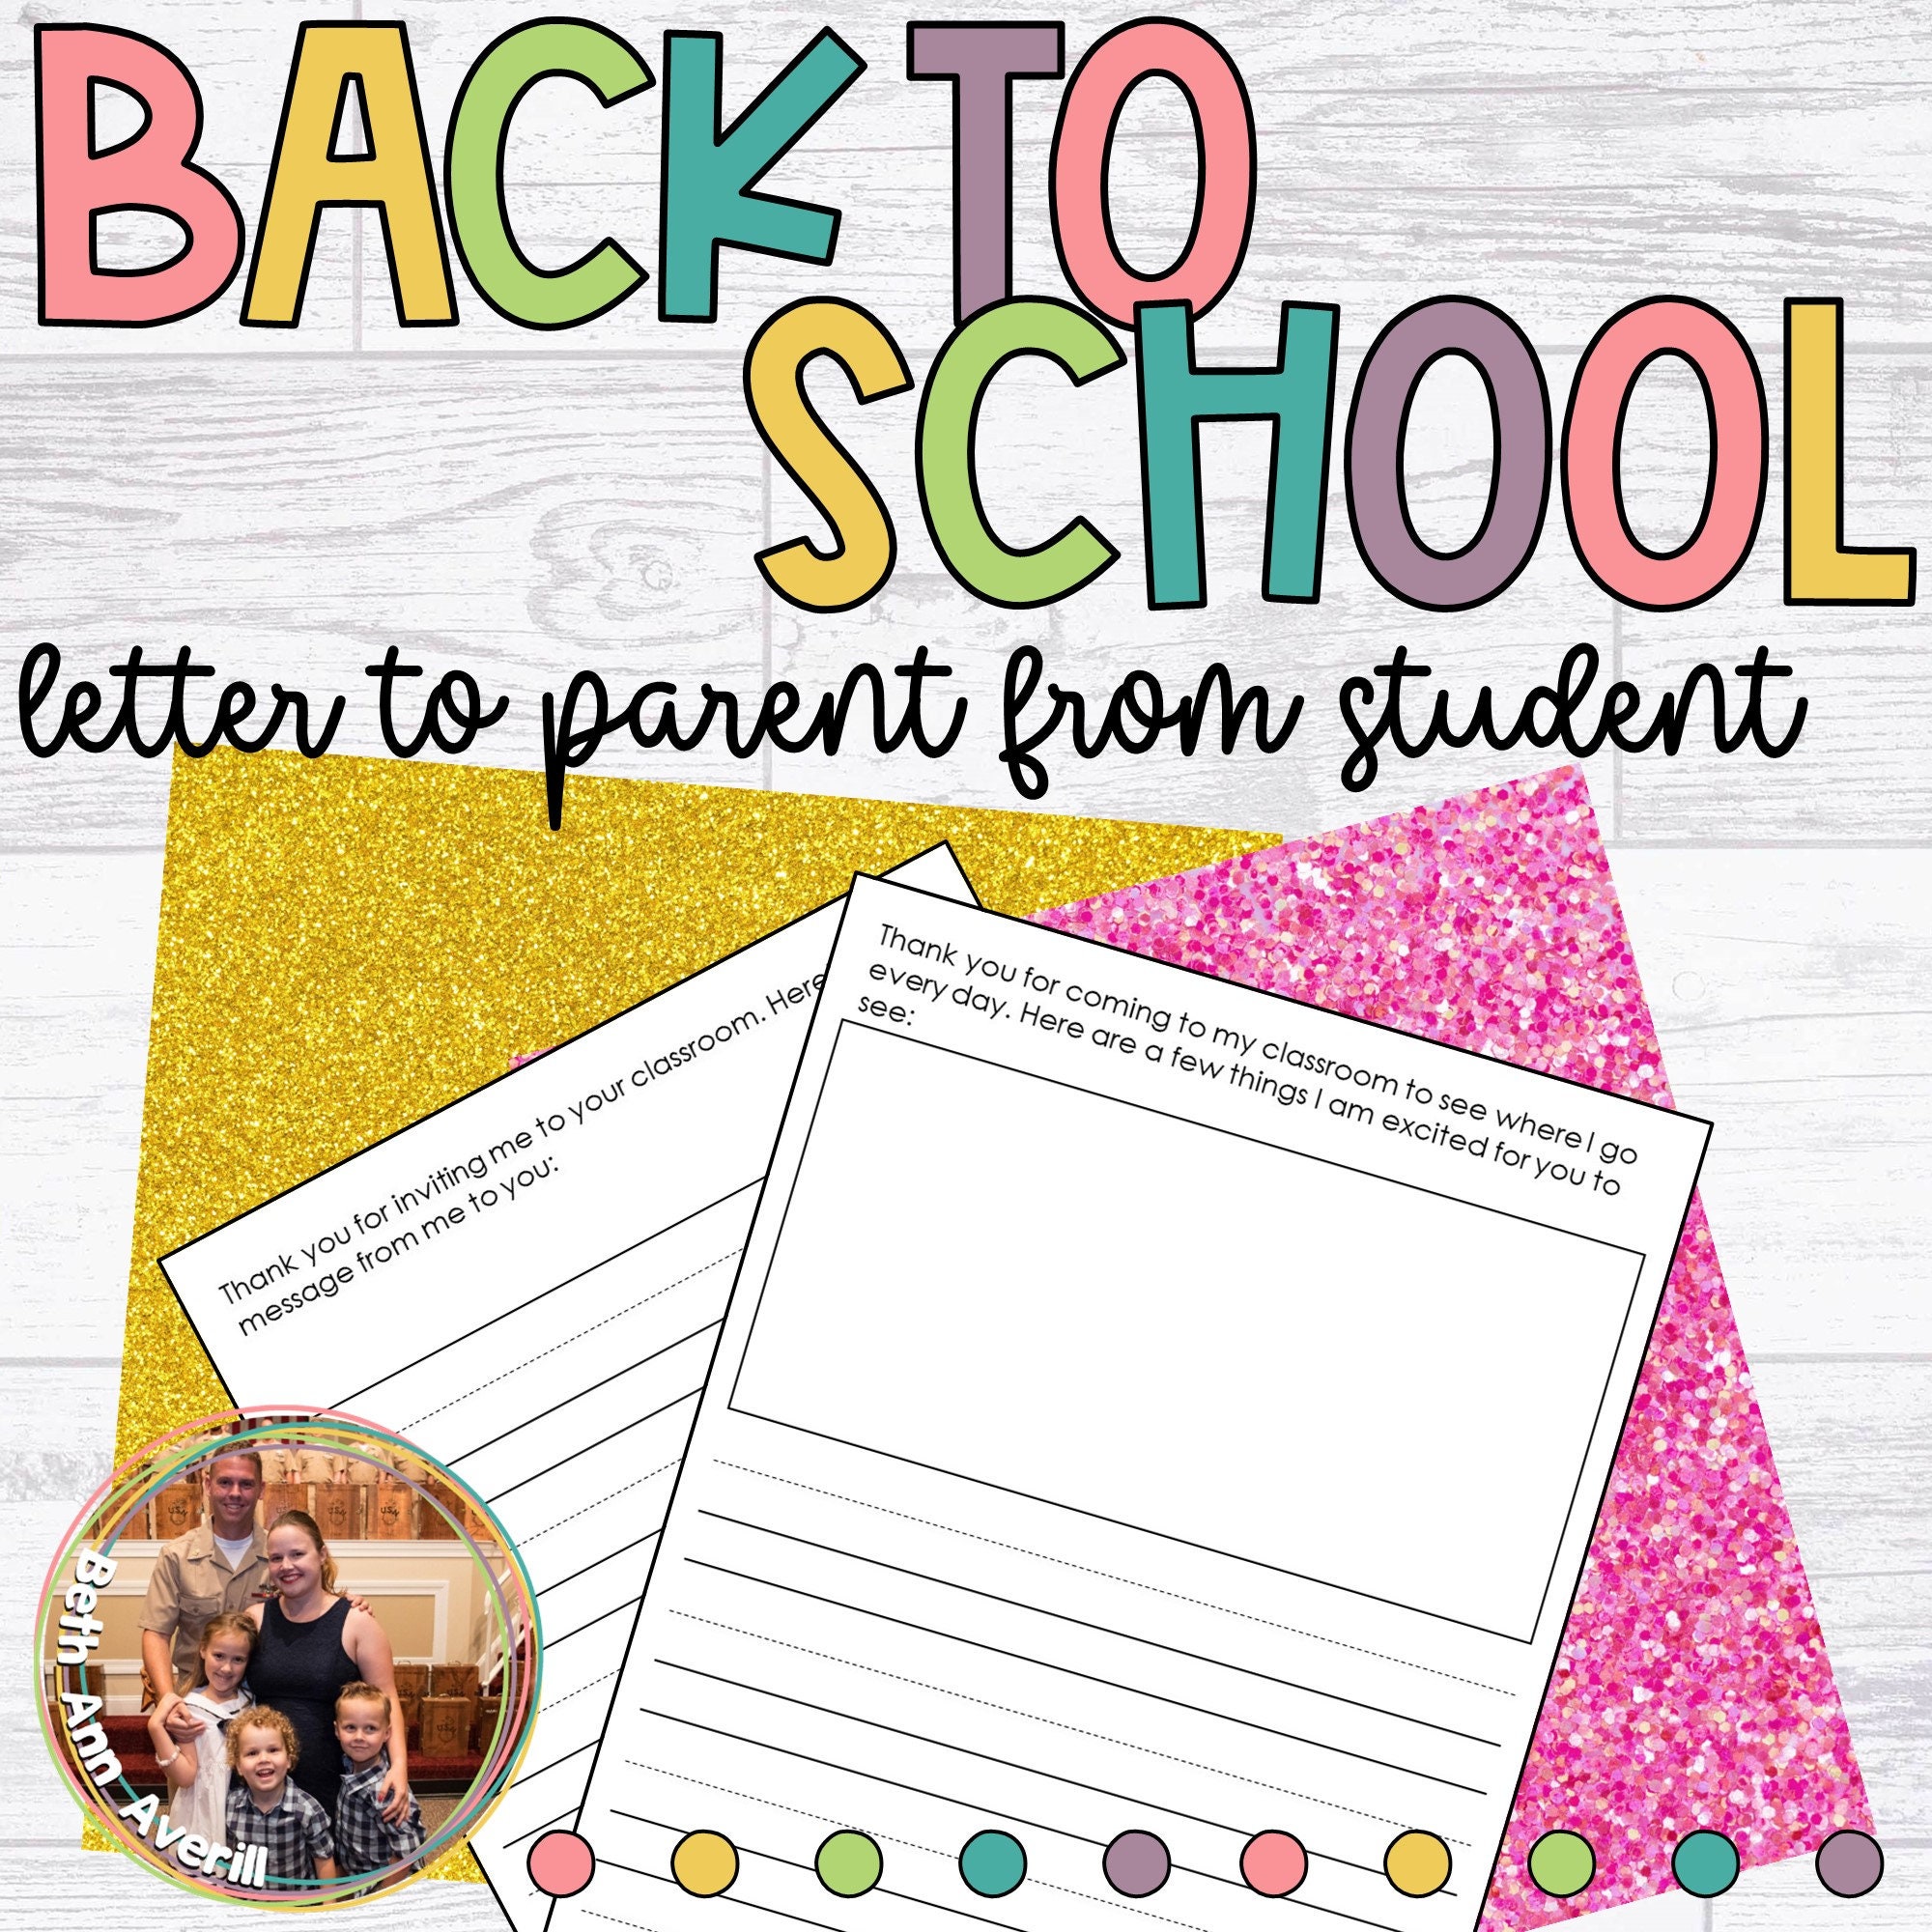 For Parents / Back-to-School Information